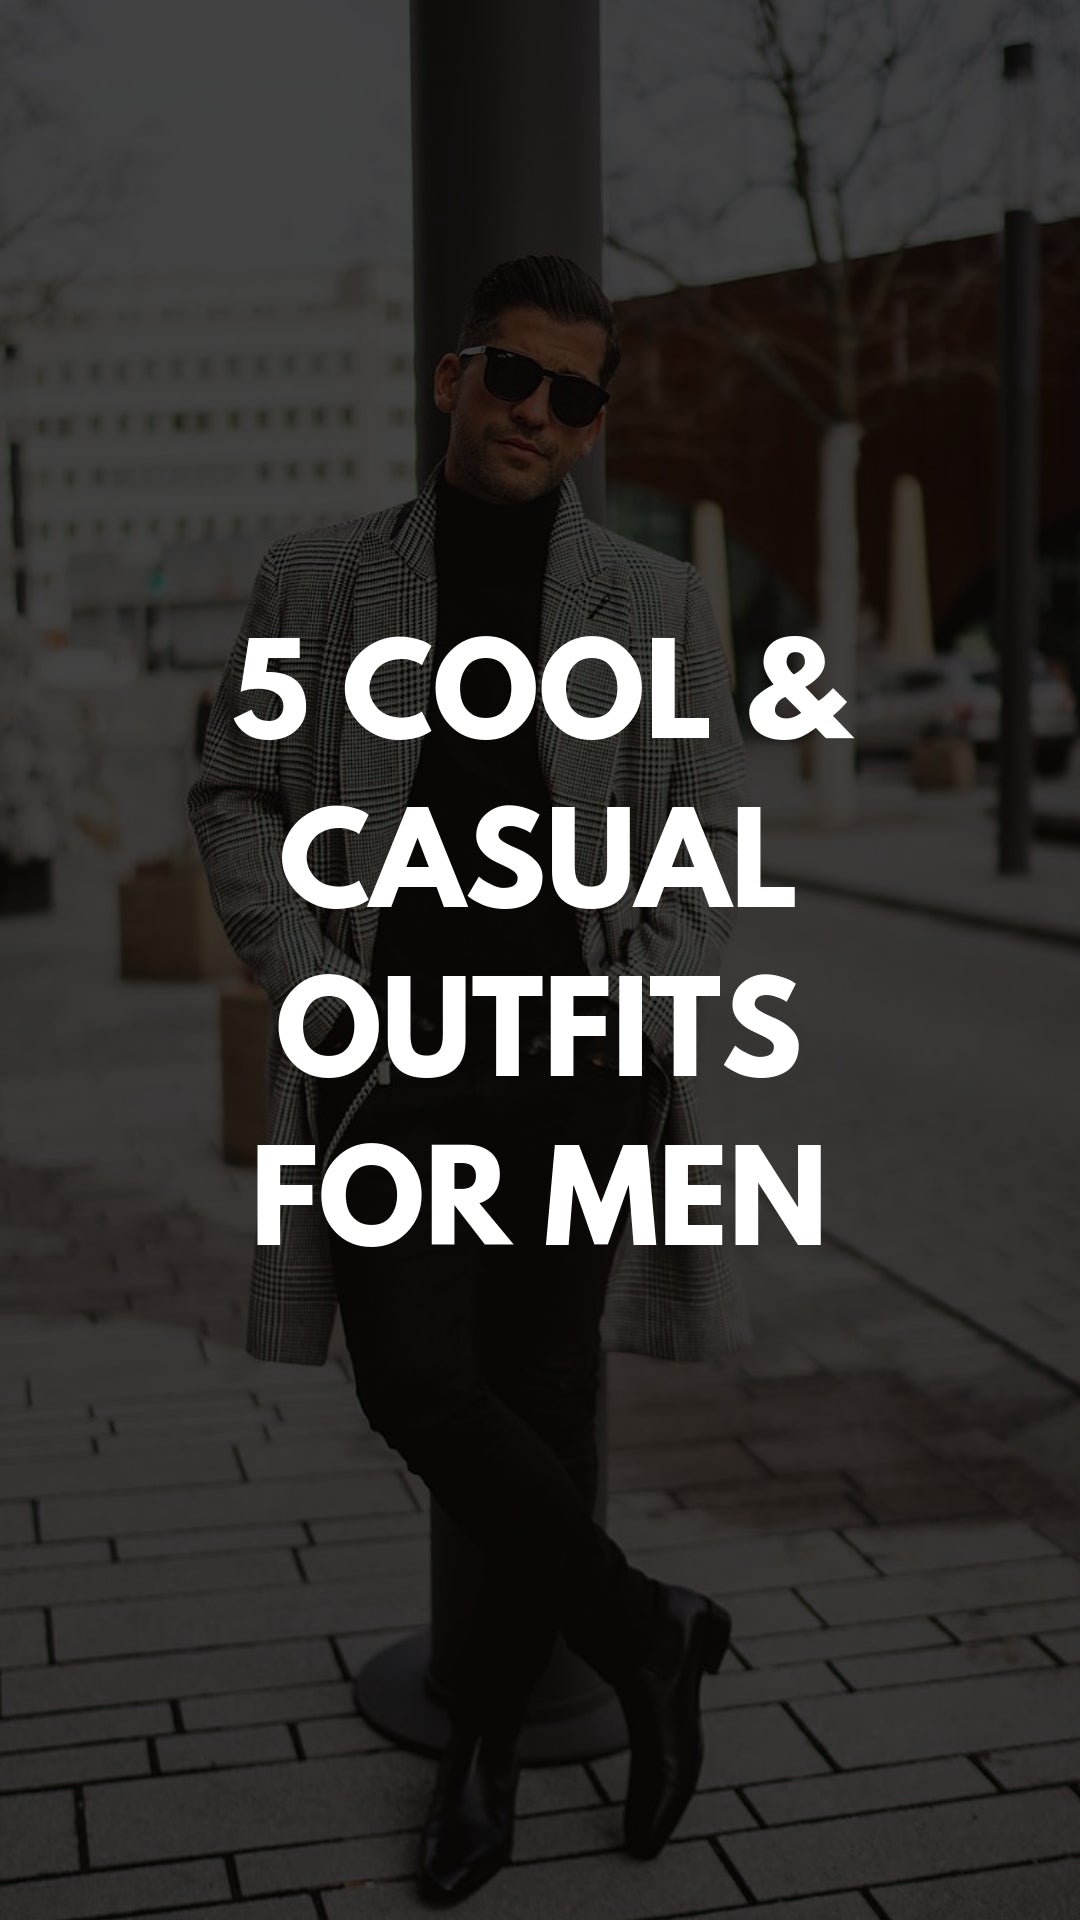 Want To Dress Sharp? Copy This Guy. #mensfashion #casual #outfits #streetstyle #kostawilliams